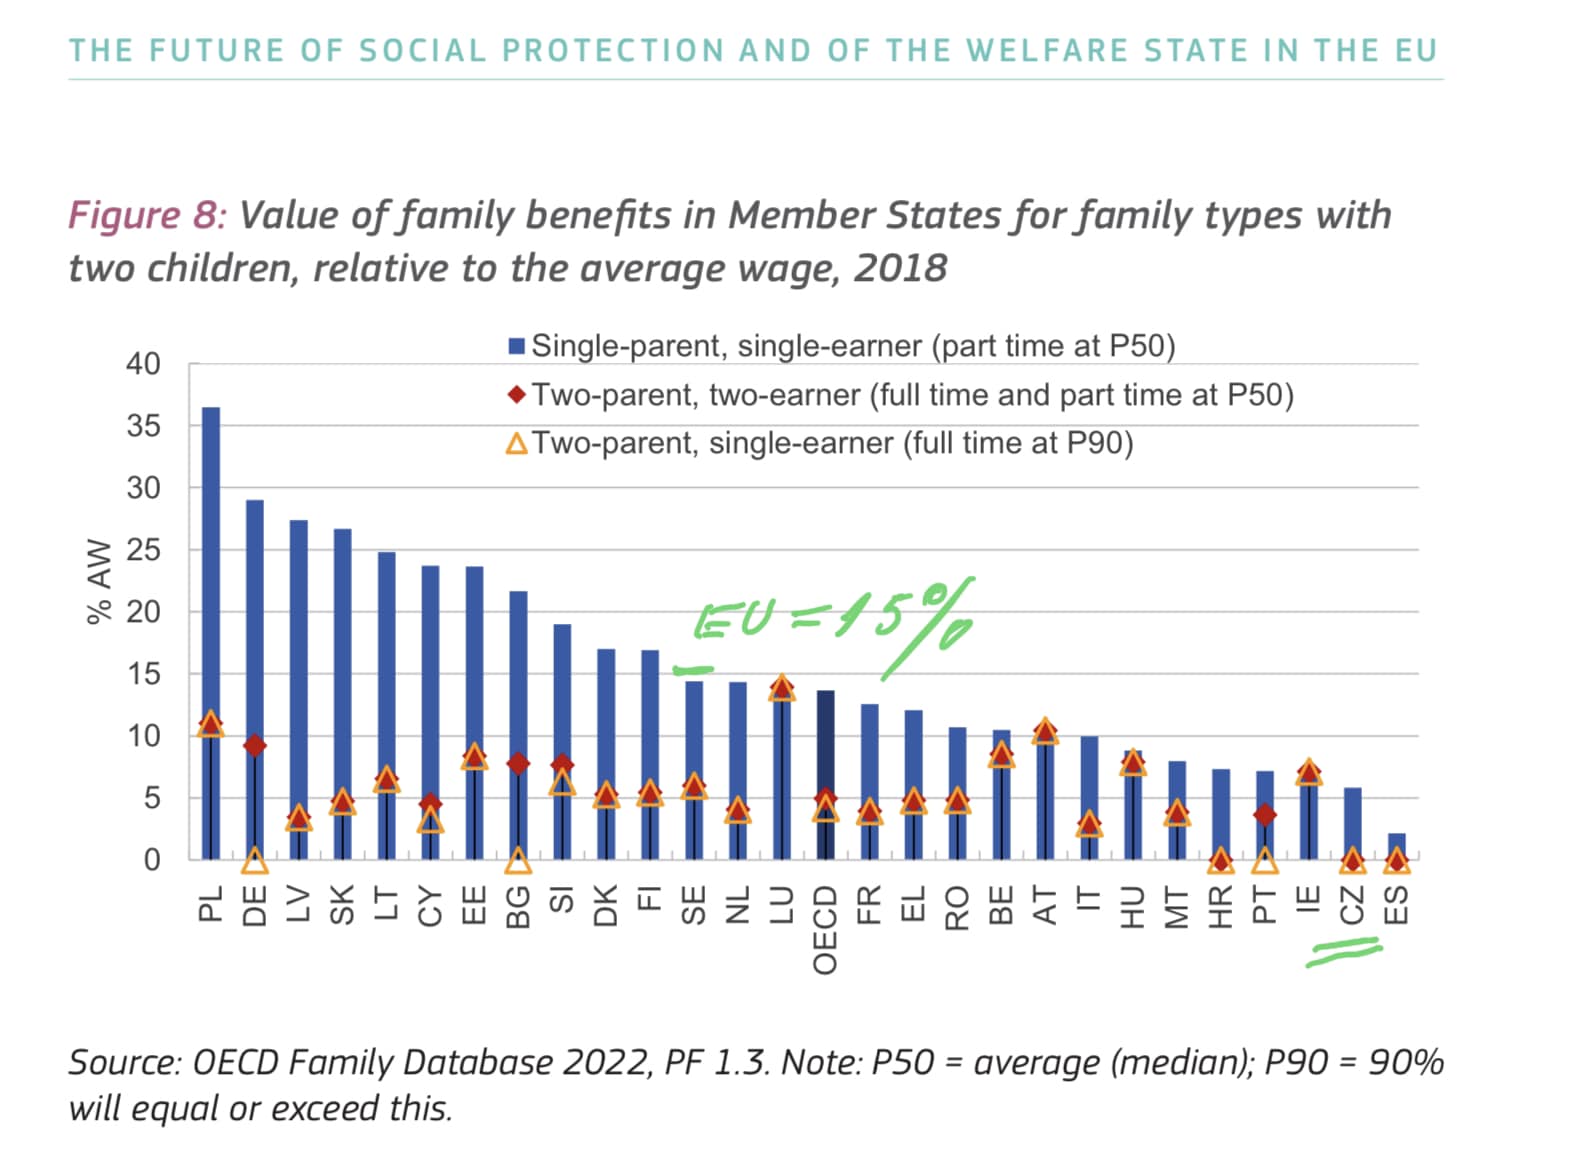 Value of family benefits in EU member states for family types with two children, relative to everage wage, 2018. Source: European Commission: The Future of Social Protection